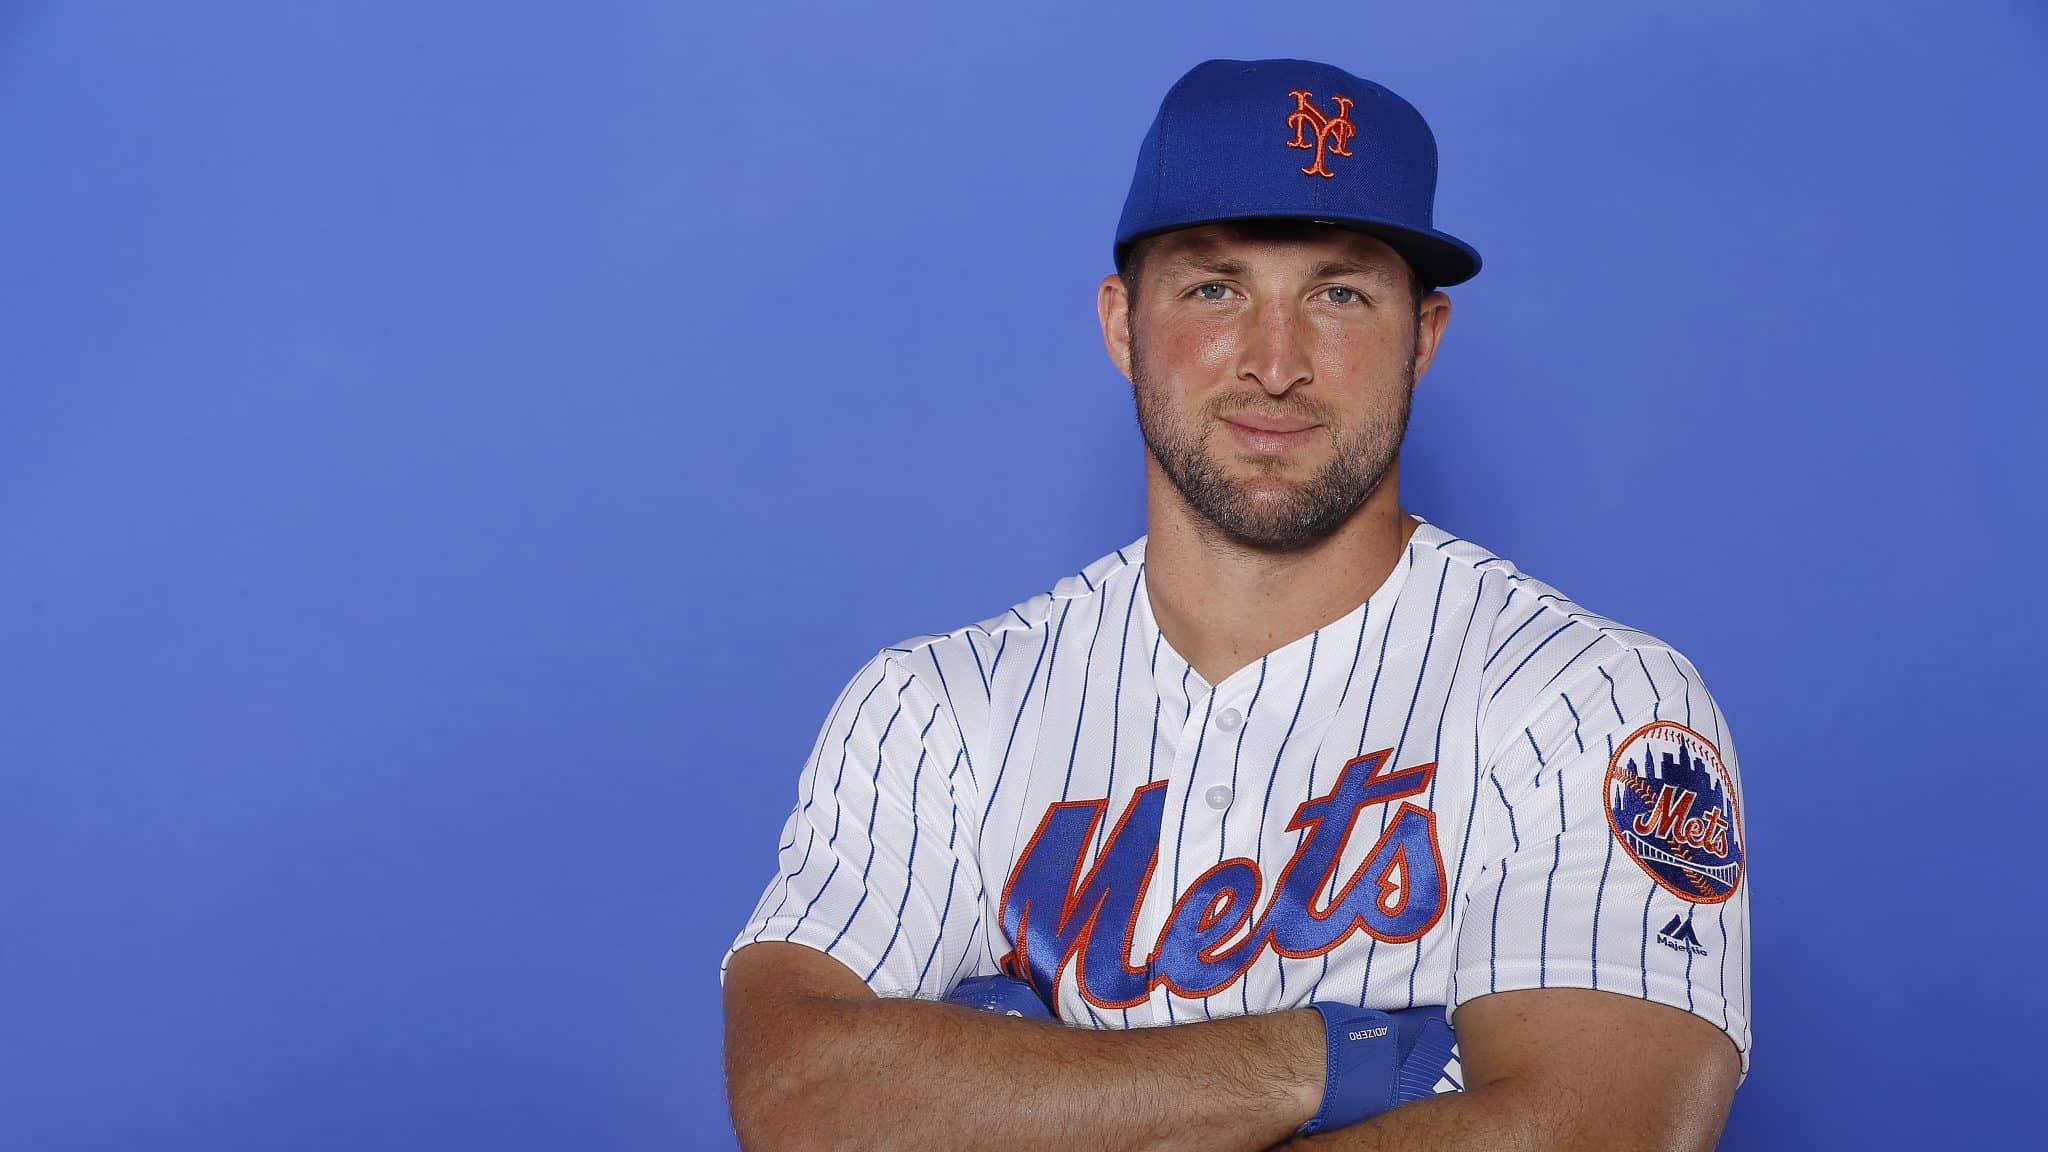 PORT ST. LUCIE, FLORIDA - FEBRUARY 21: Tim Tebow #15 of the New York Mets poses for a photo on Photo Day at First Data Field on February 21, 2019 in Port St. Lucie, Florida.